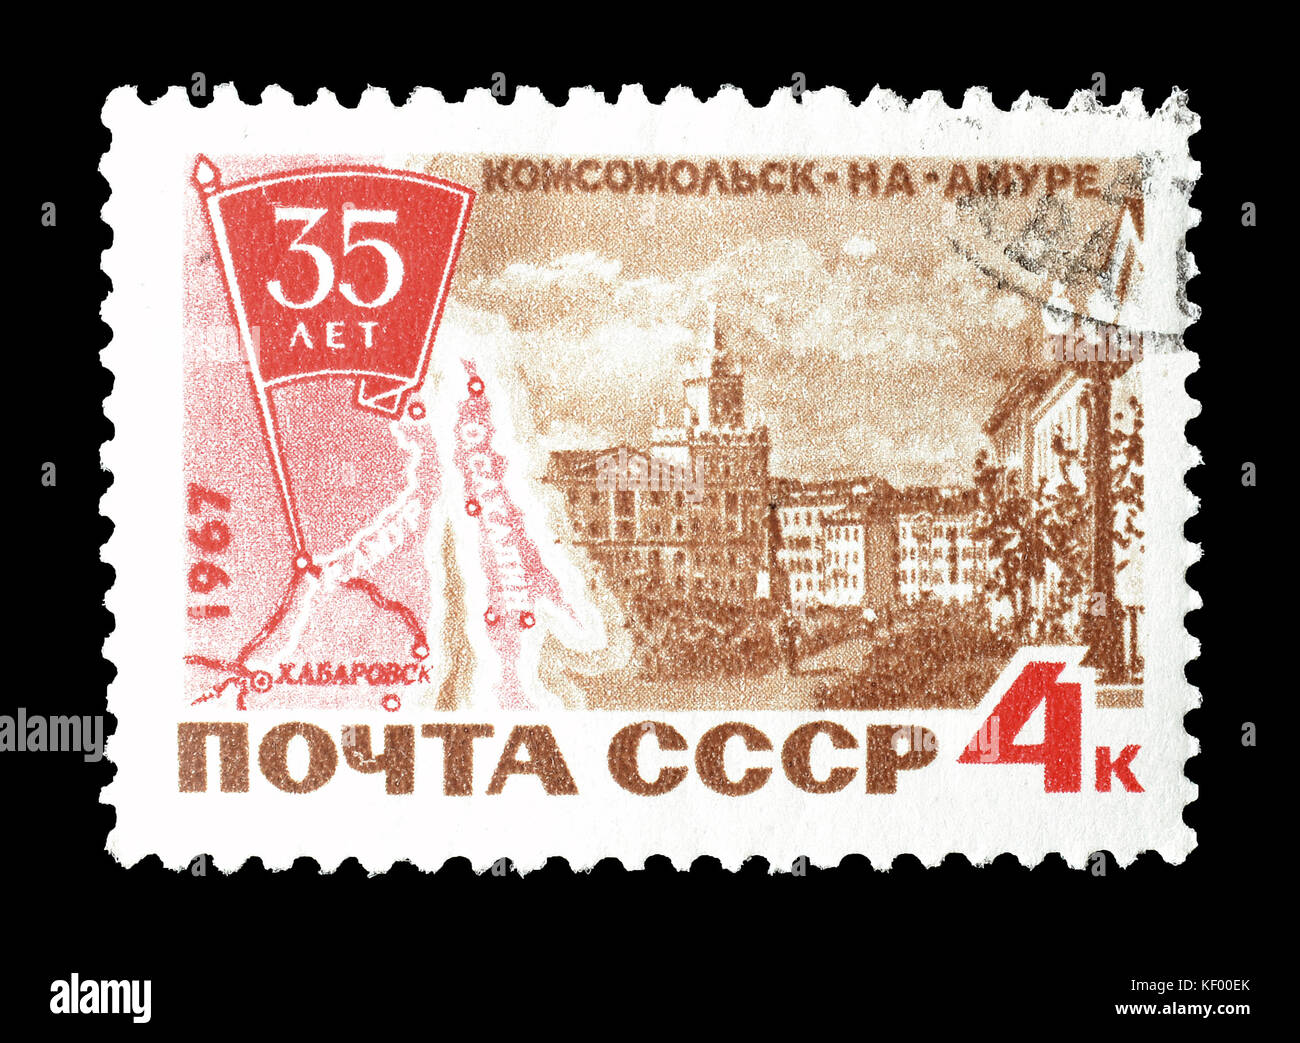 Cancelled postage stamp printed by Soviet Union, that shows Komsomolsk on Amur. Stock Photo